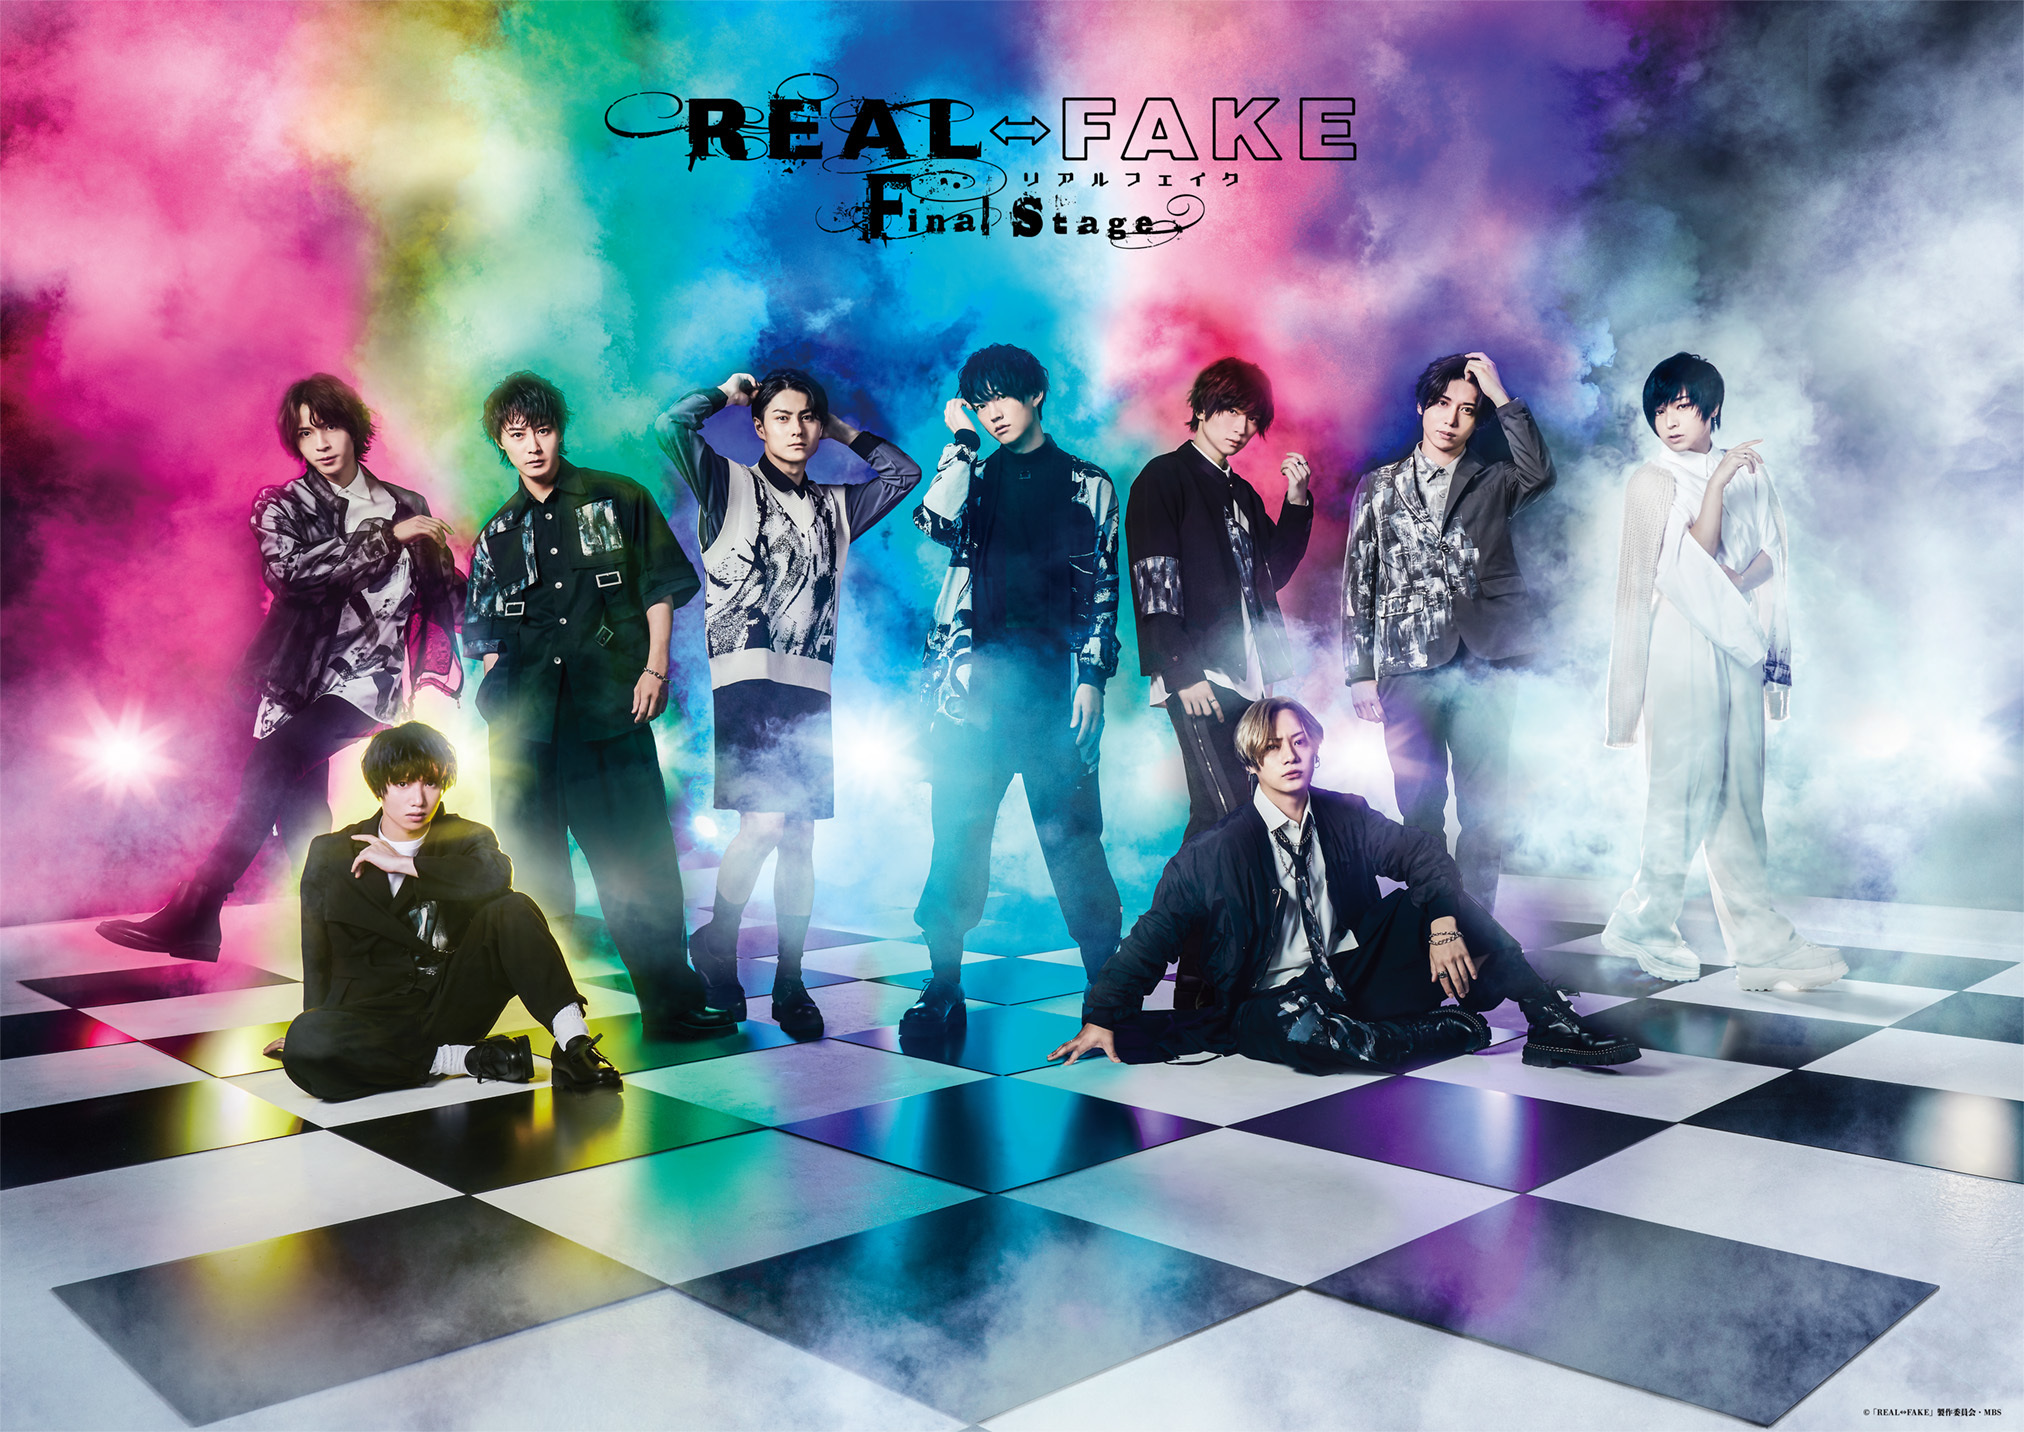 『REAL⇔FAKE Final Stage』 　　　(C)「REAL⇔FAKE」製作委員会・MBS